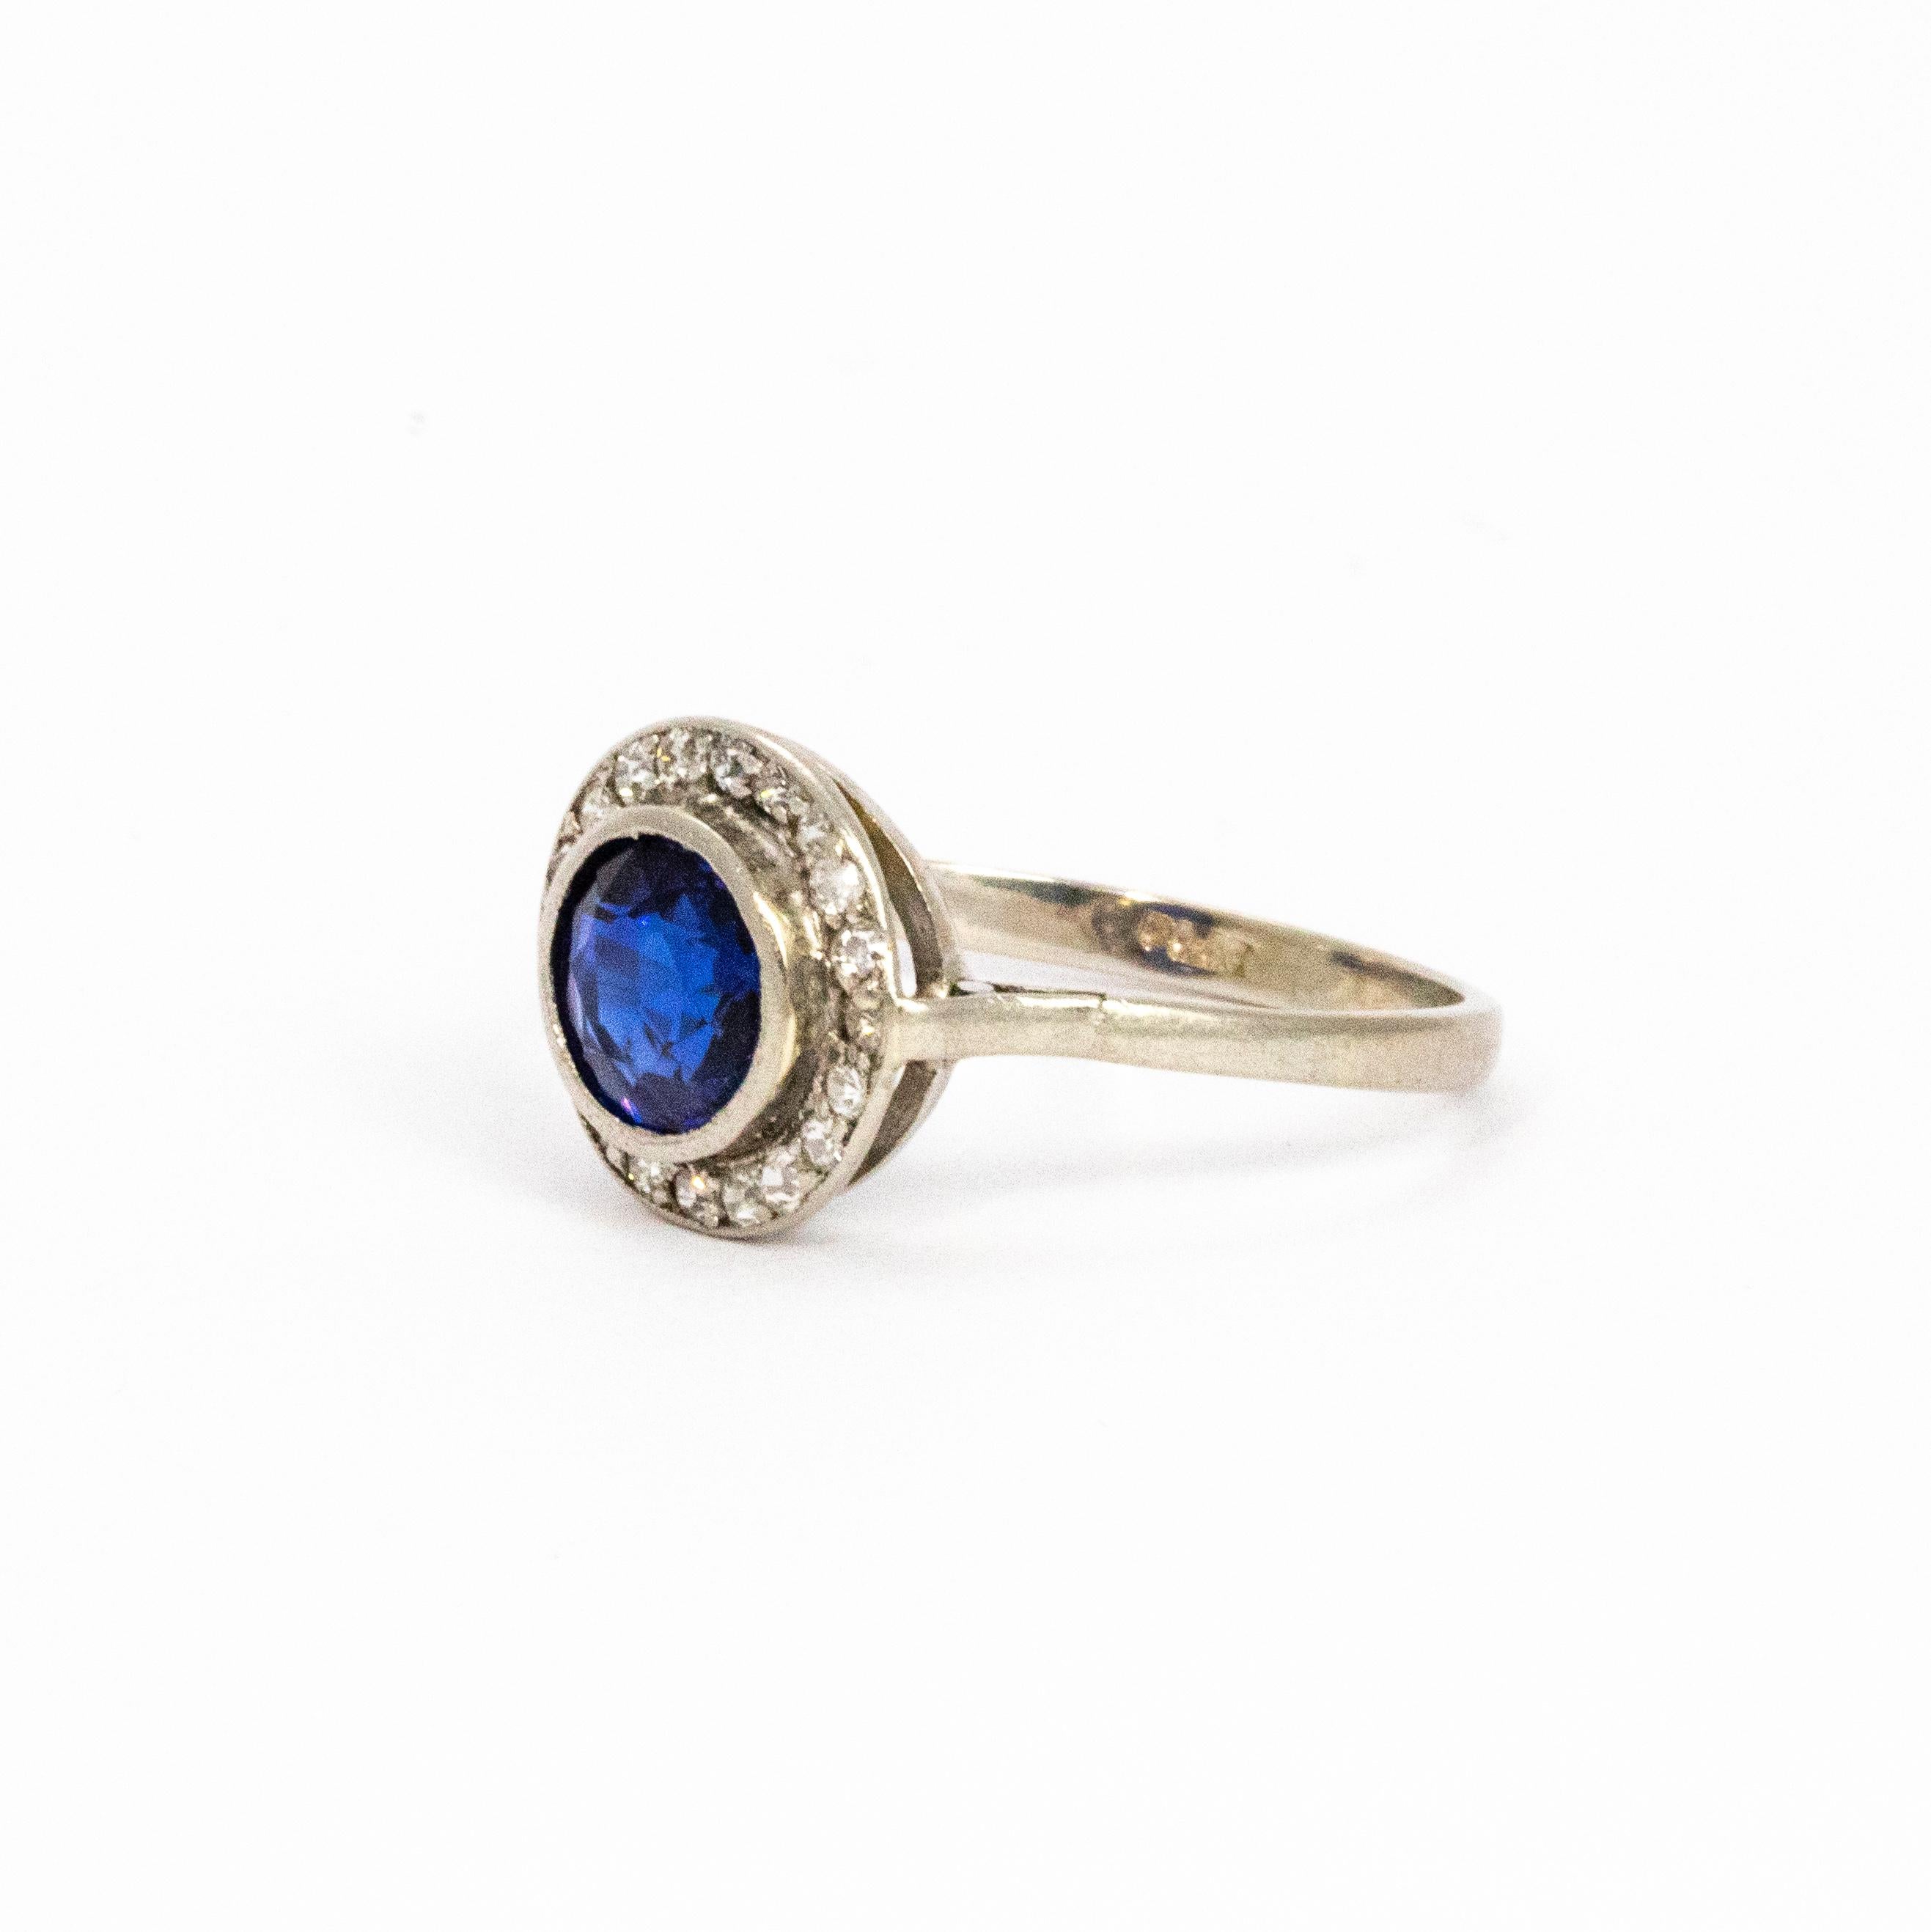 A large glistening sapphire surrounded by a halo of sparkling diamonds all set in platinum.

Ring Size: L 1/2 or 6